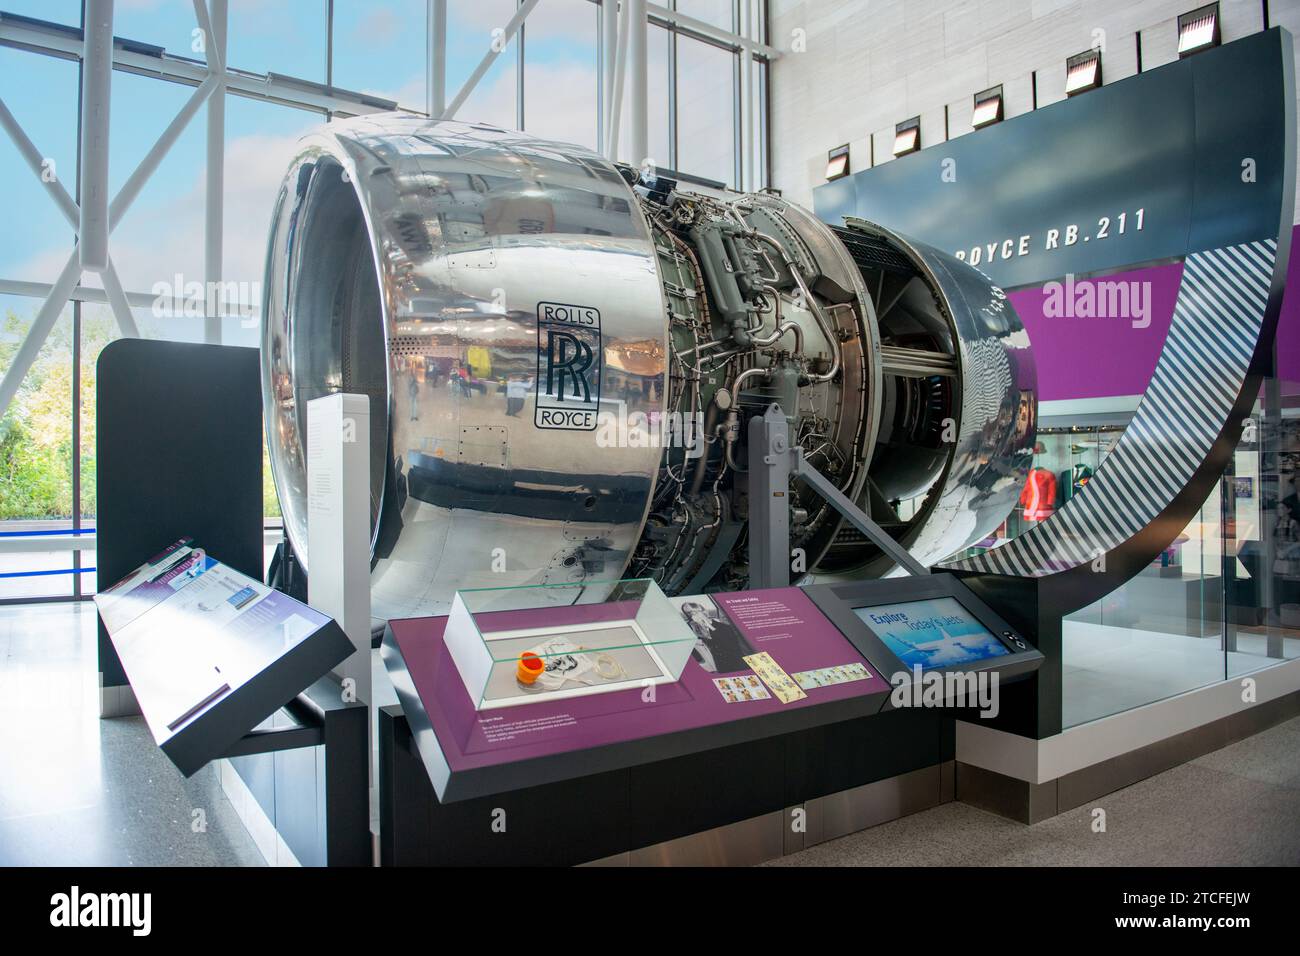 Rolls Royce RB211 jet engine at the Smithsonian Air and Space Museum in Washington DC Stock Photo